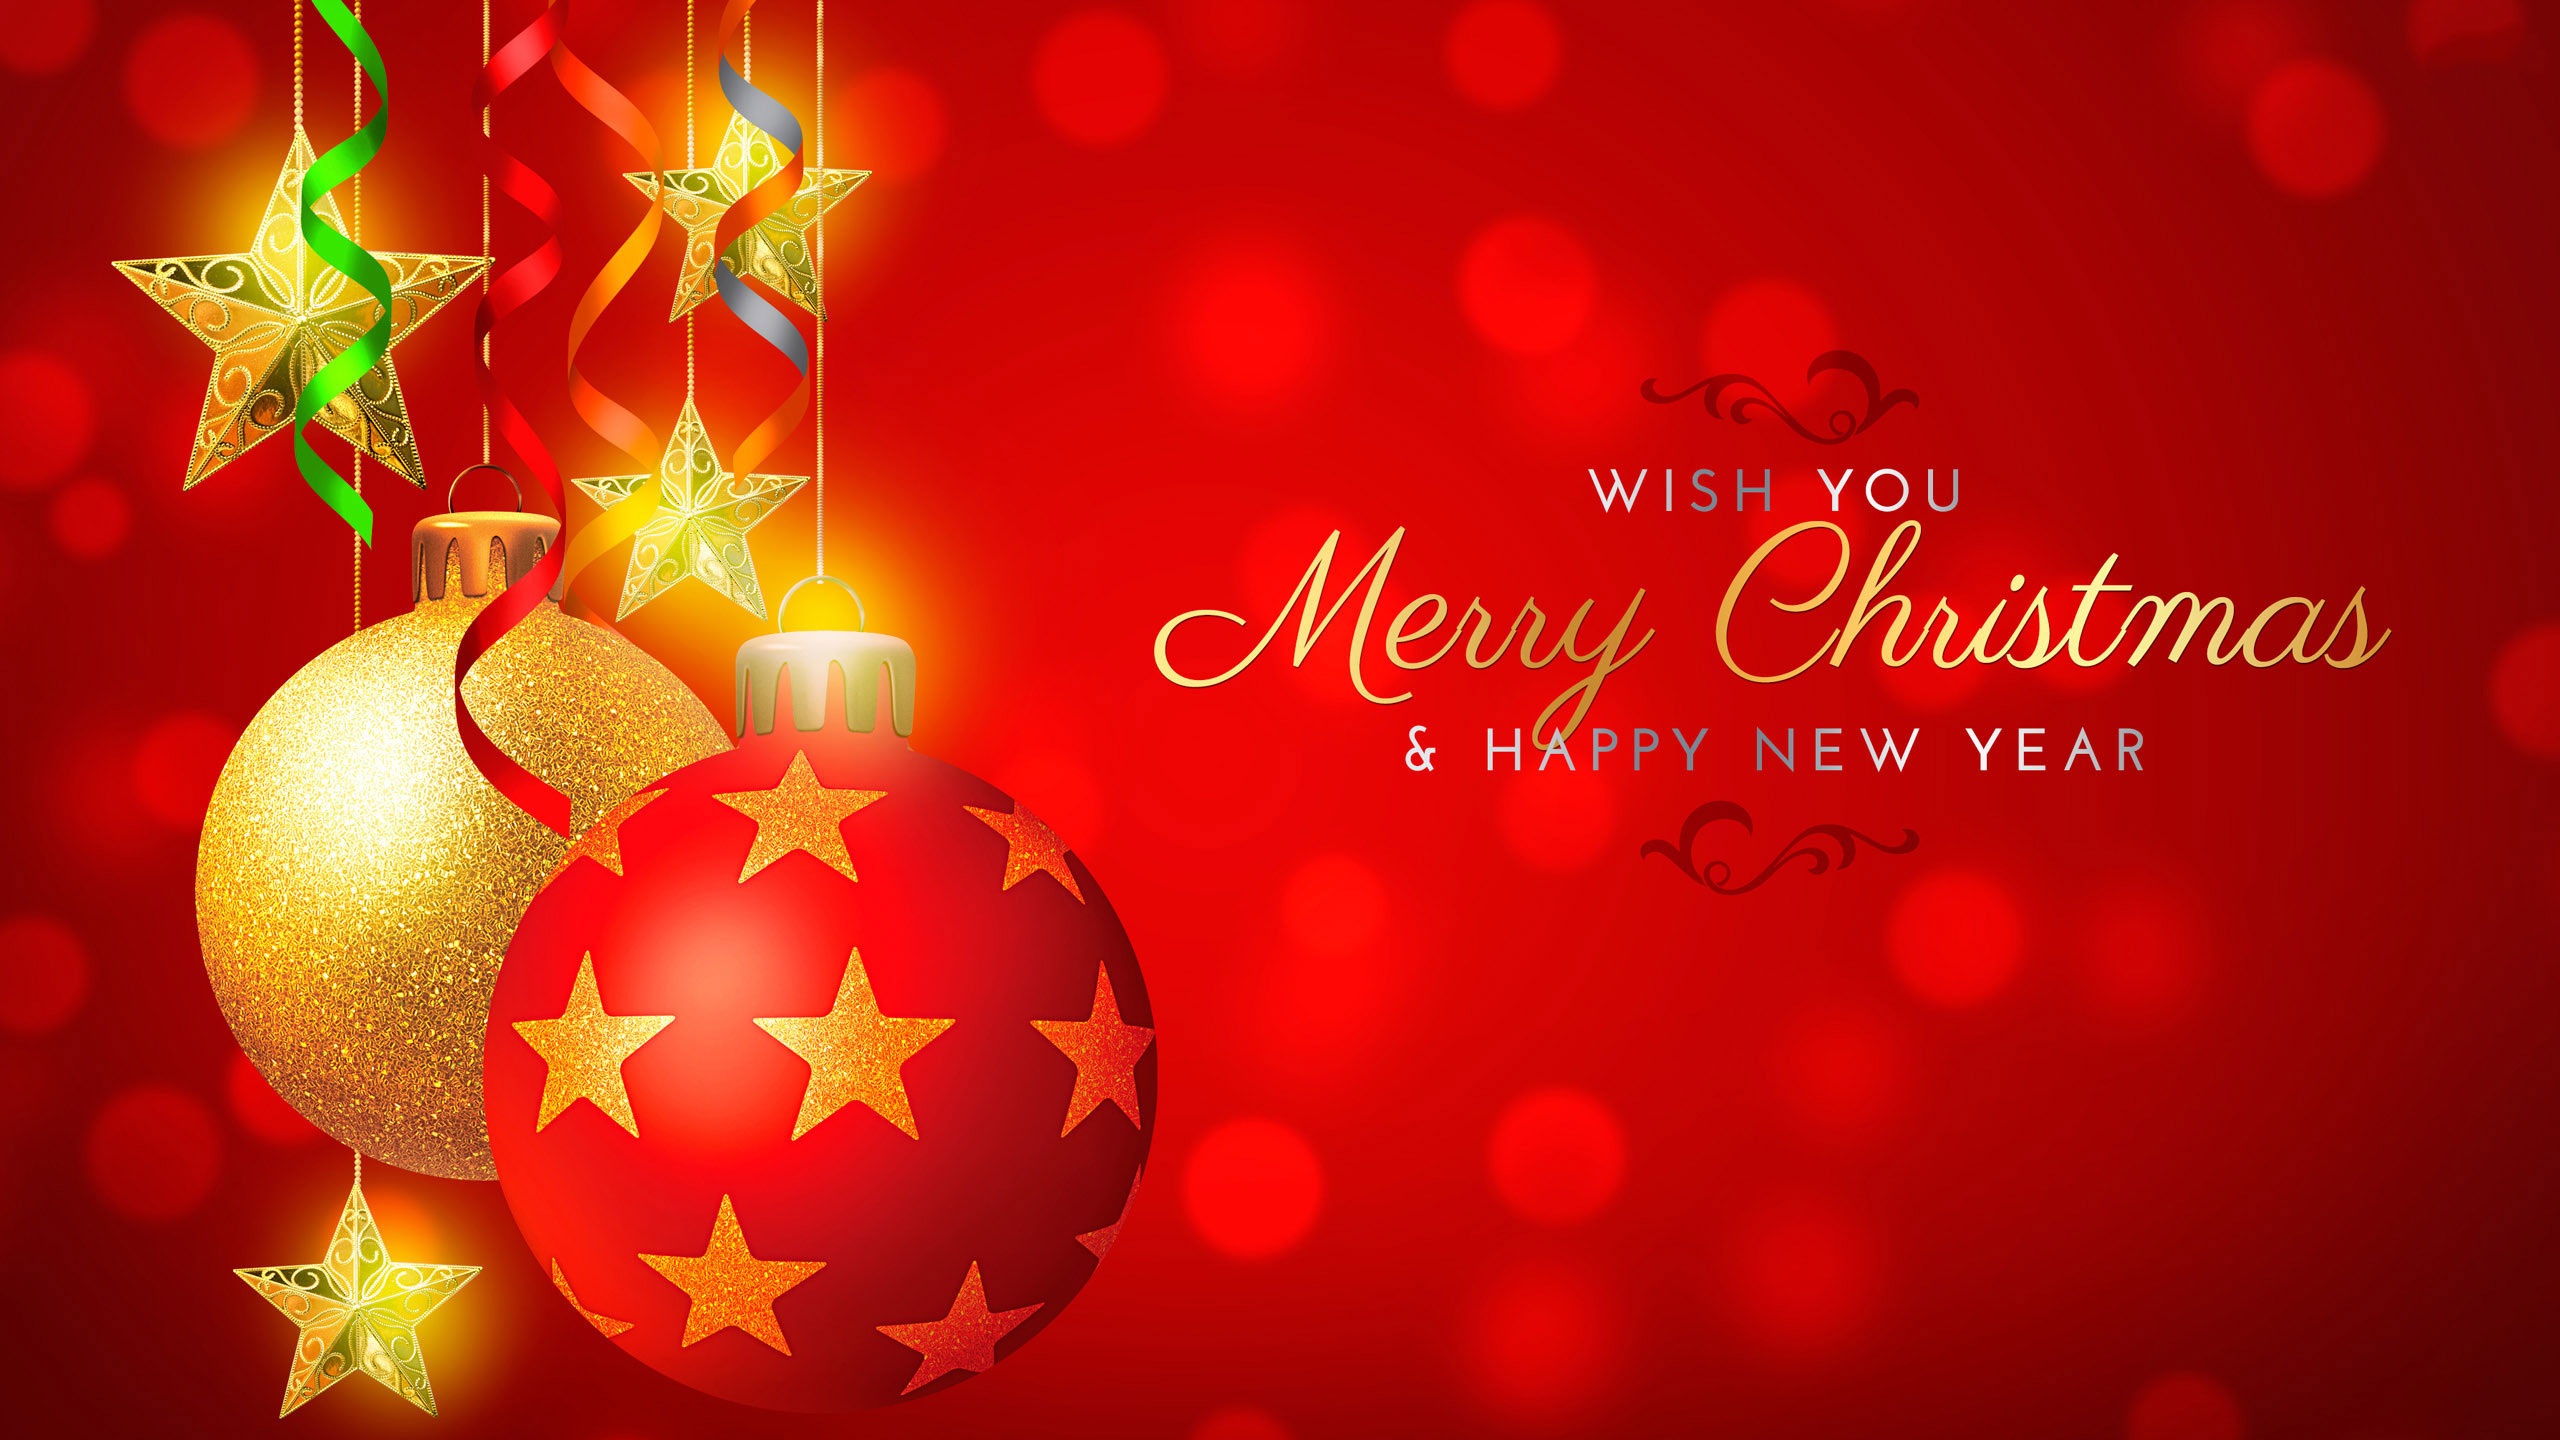 Wish You Merry Christmas And Happy New Year Wallpaper - Wishes You A Merry Christmas - HD Wallpaper 